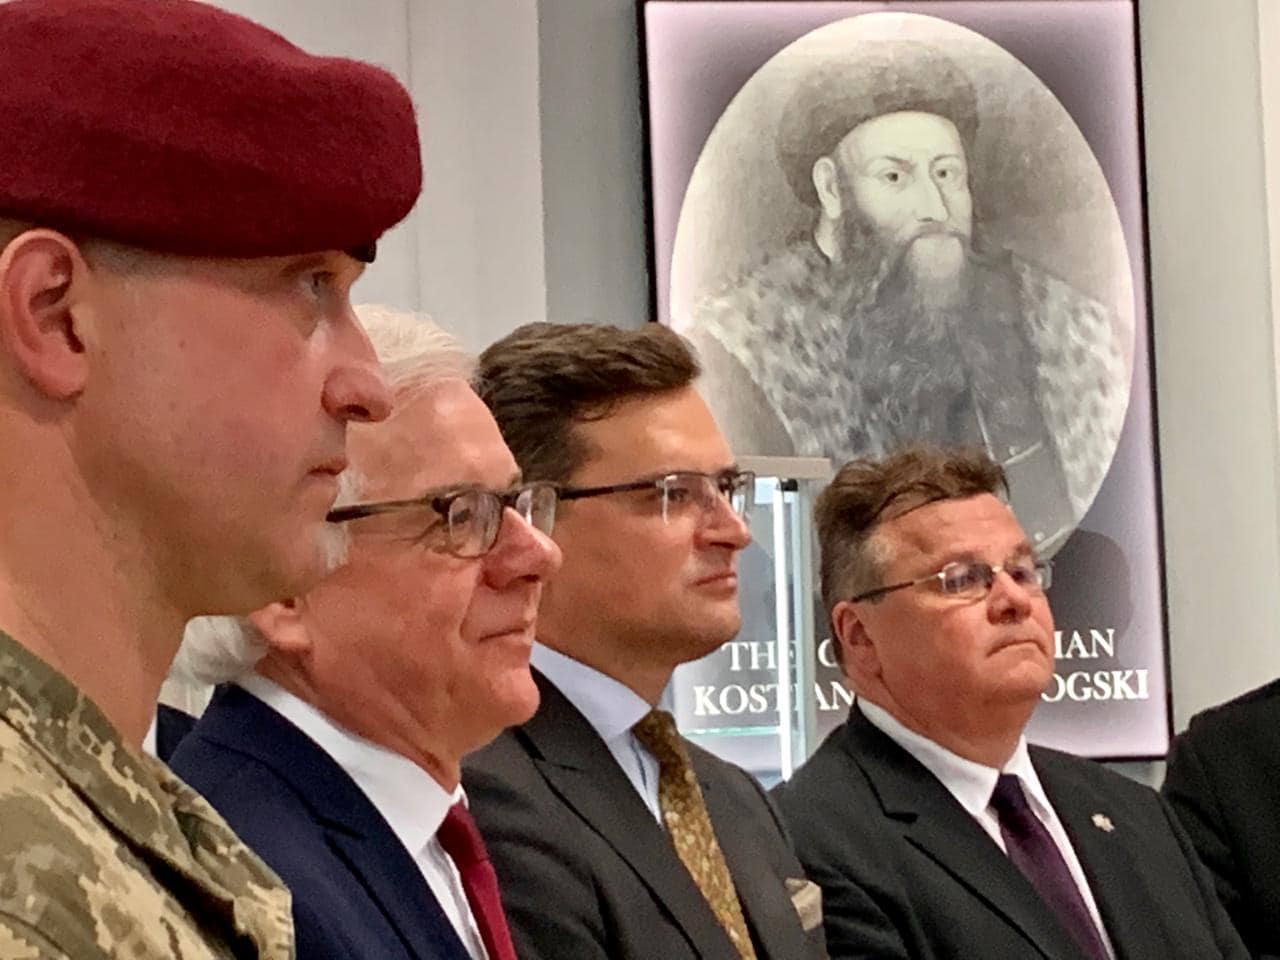 From left to right: Dmytro Bratishko, commander of the LitPolUkr brigade, Ministers of Foreign Affairs of Poland, Ukraine, and Lithuania Jacek Czaputowicz, Dmytro Kuleba, and Linas Linkevičius. In the background is a portrait of Kostiantyn Ostrozhskyi. Source: Dmytro Kuleba’s FB page ~